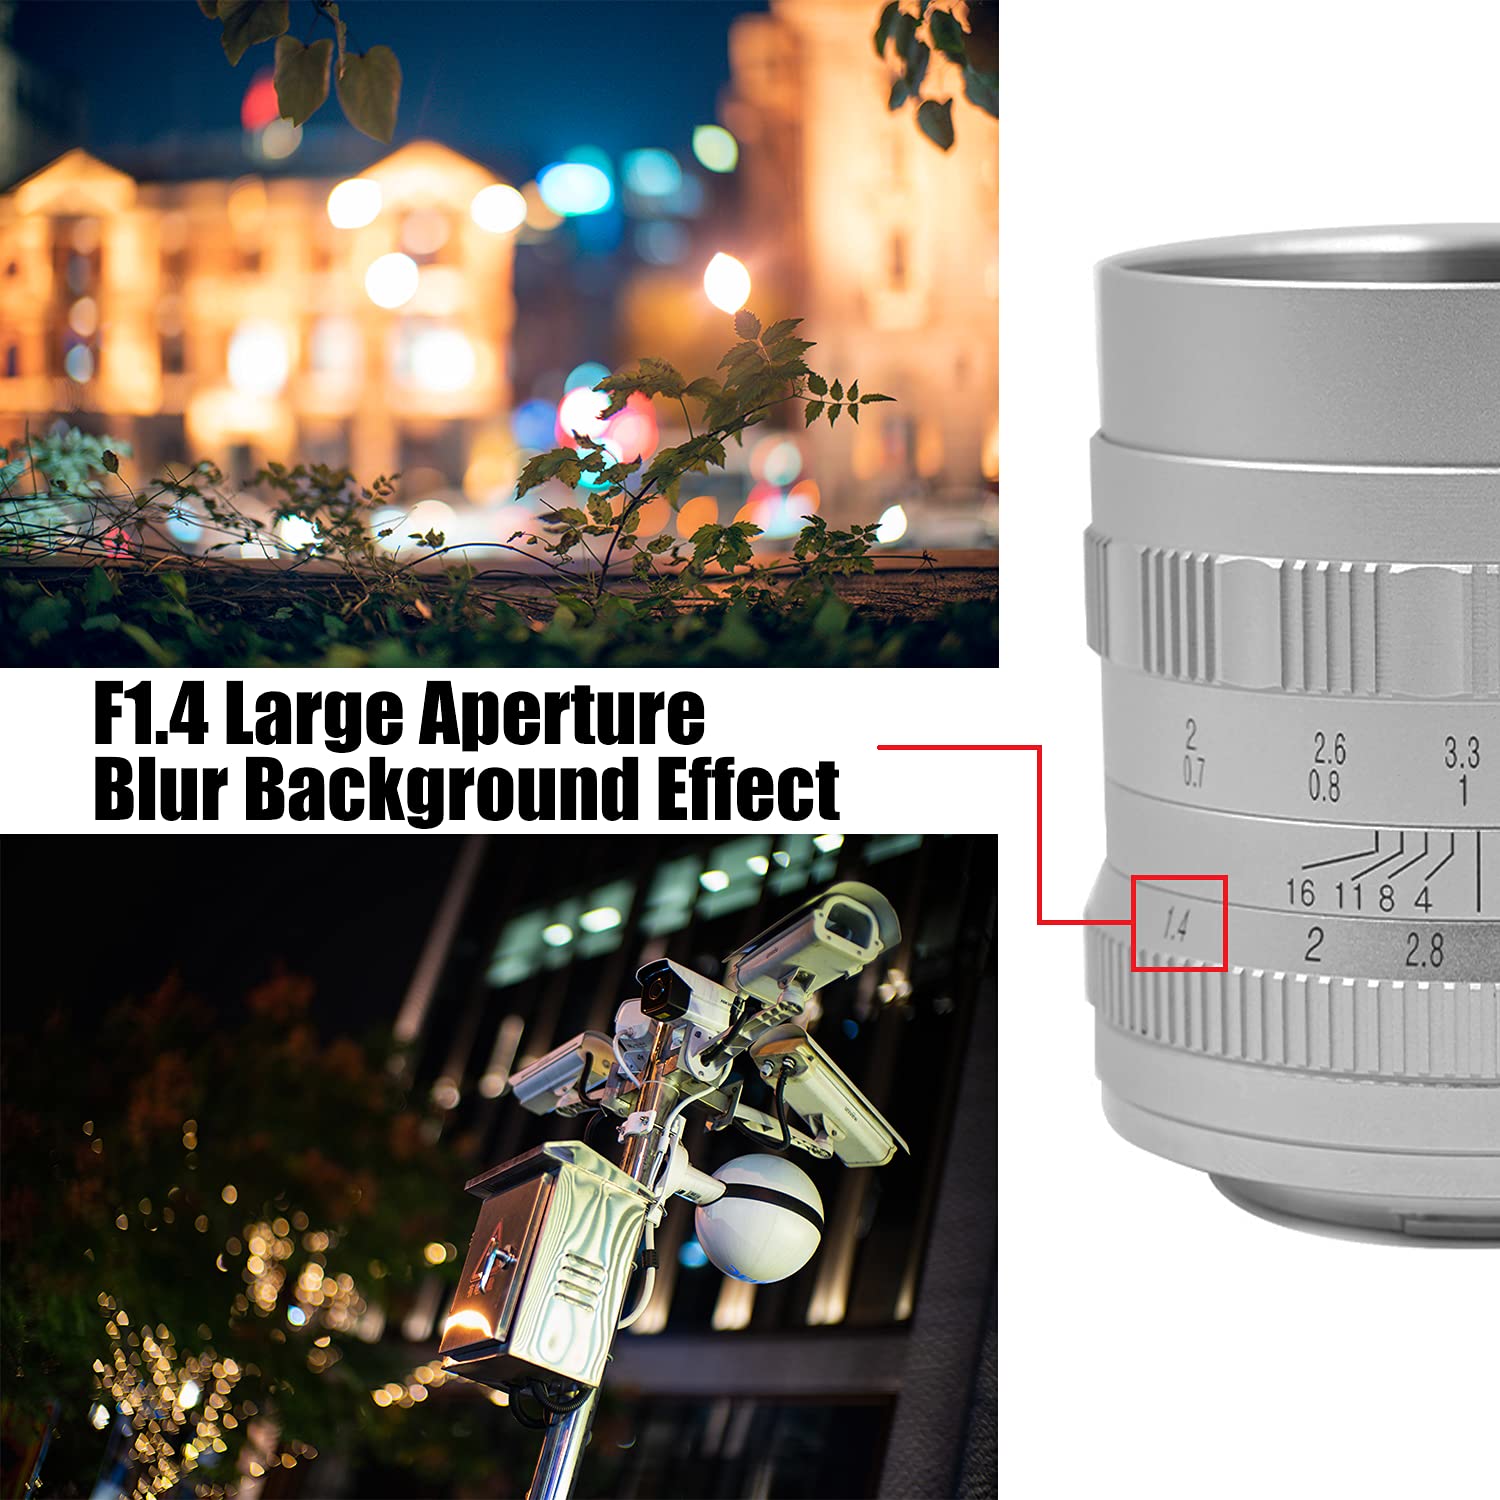 Brightin Star 50mm F1.4 Manual Focus Prime Lens for L-Mount Leica/Panasonic/Sigma Mirrorless Cameras, APS-C MF Large Aperture Standard Fixed Lens, Fit for SL, SL2, T, TL, TL2, TL18, CL/S1, S1R, S1H